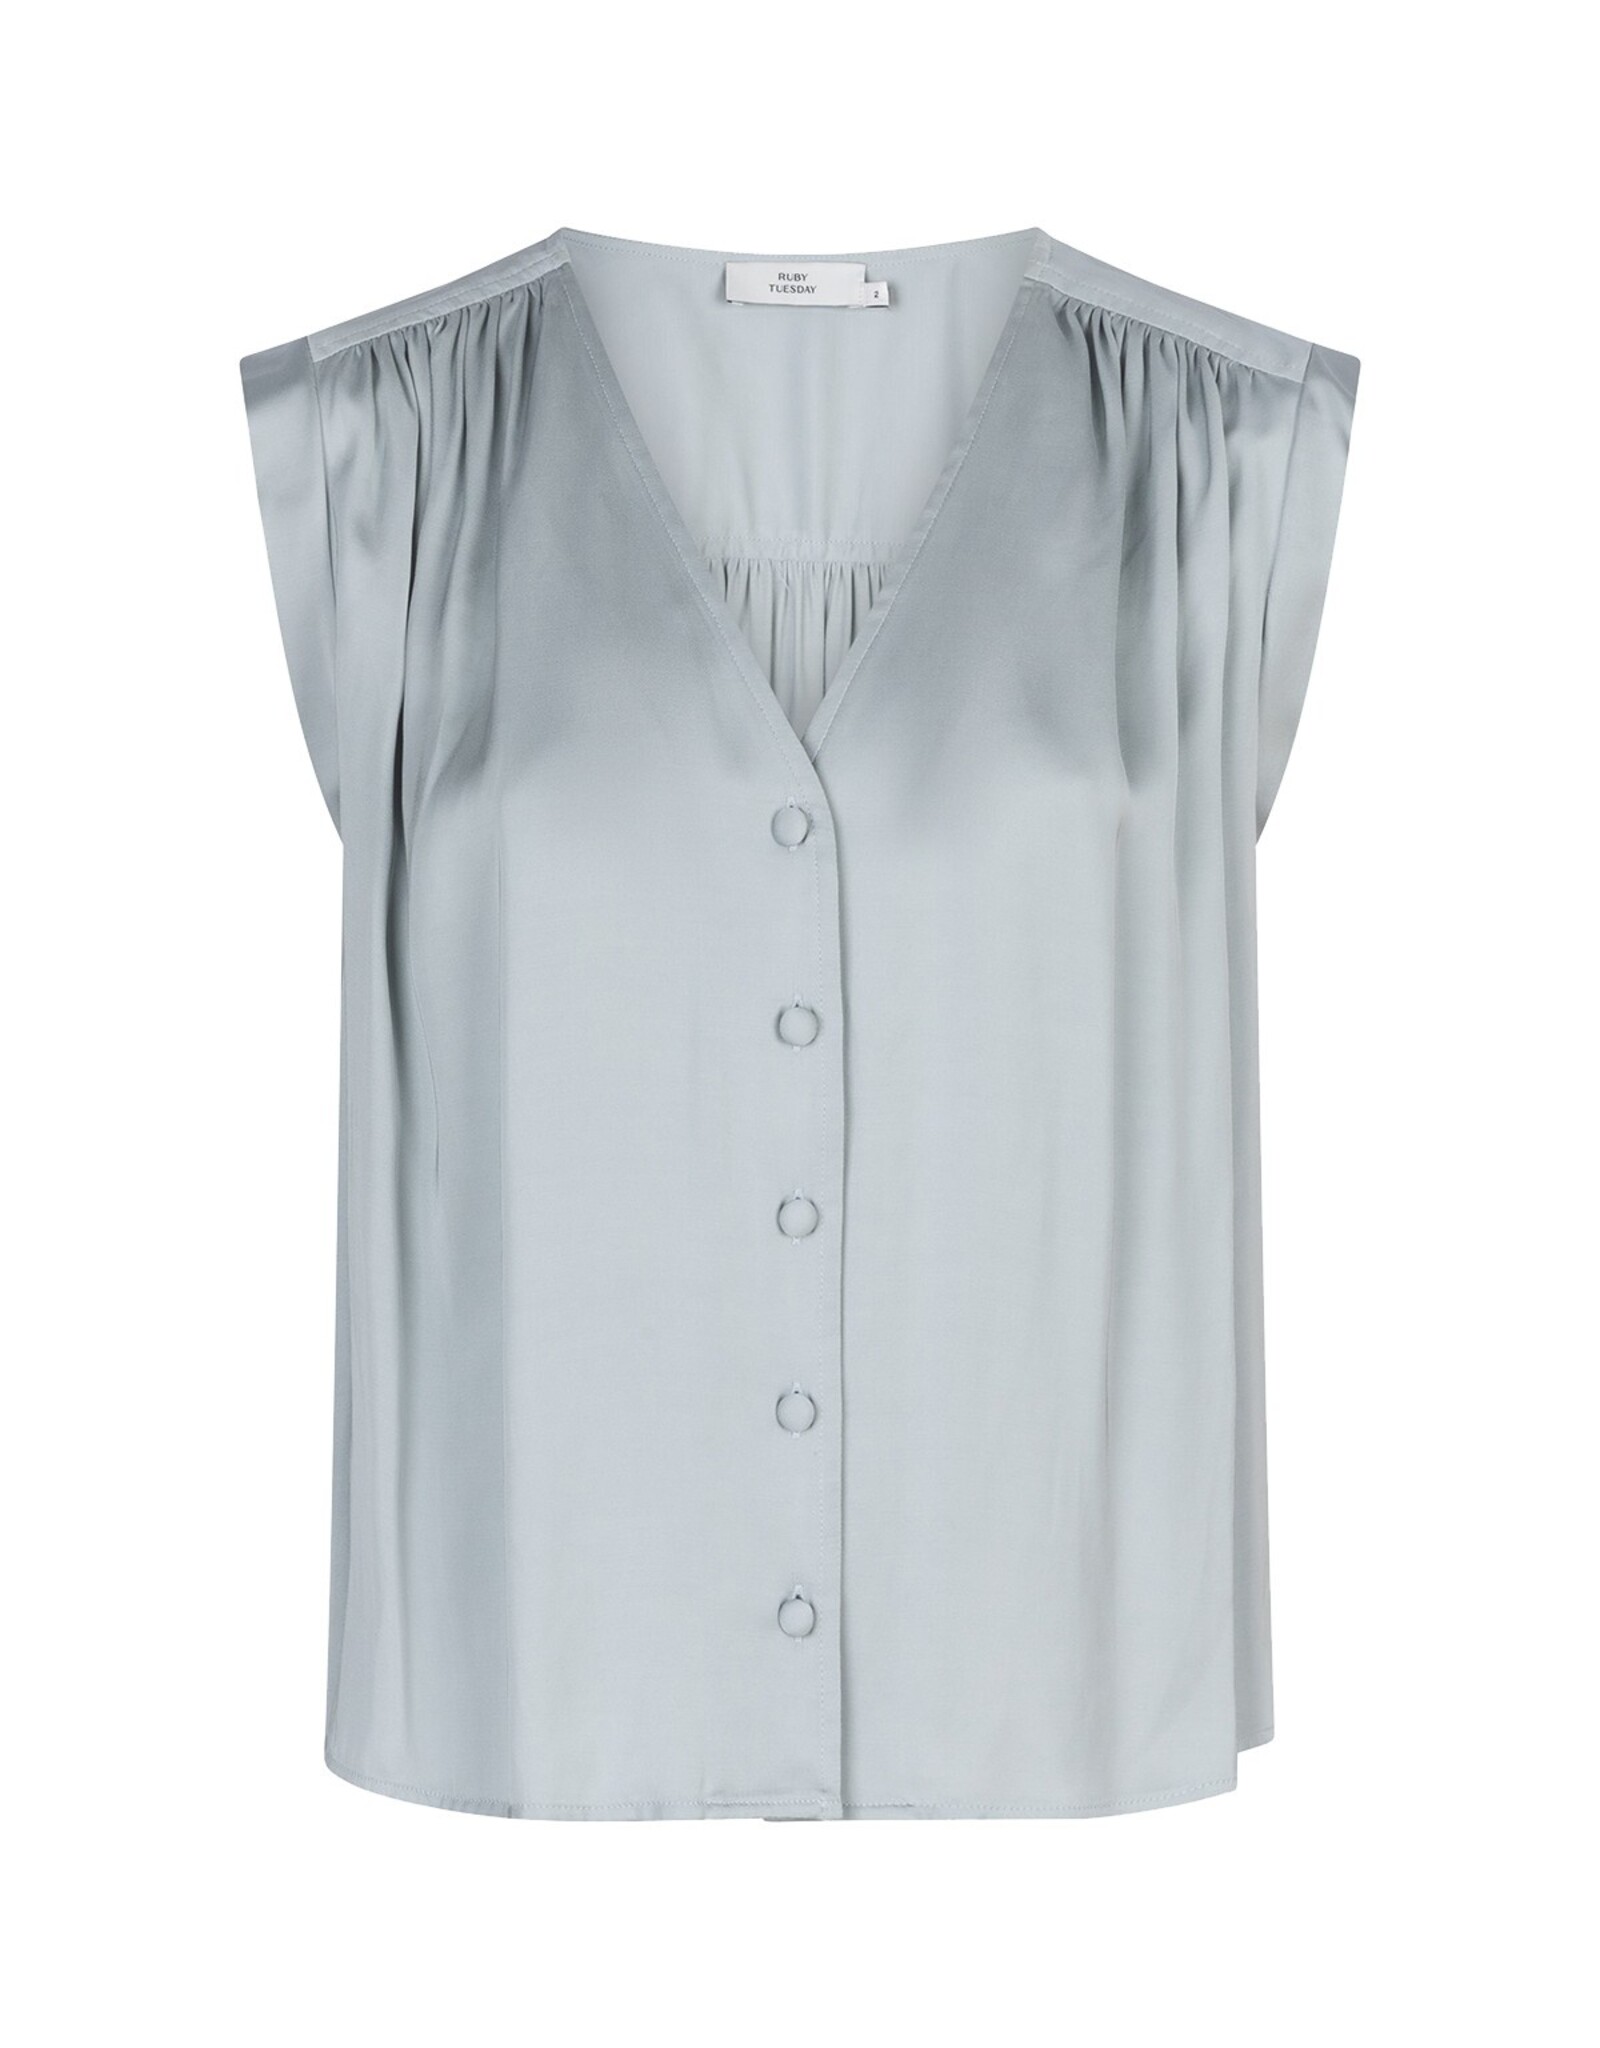 Ruby Tuesday ROLA v neck short sleeve blouse MINERAL GREY